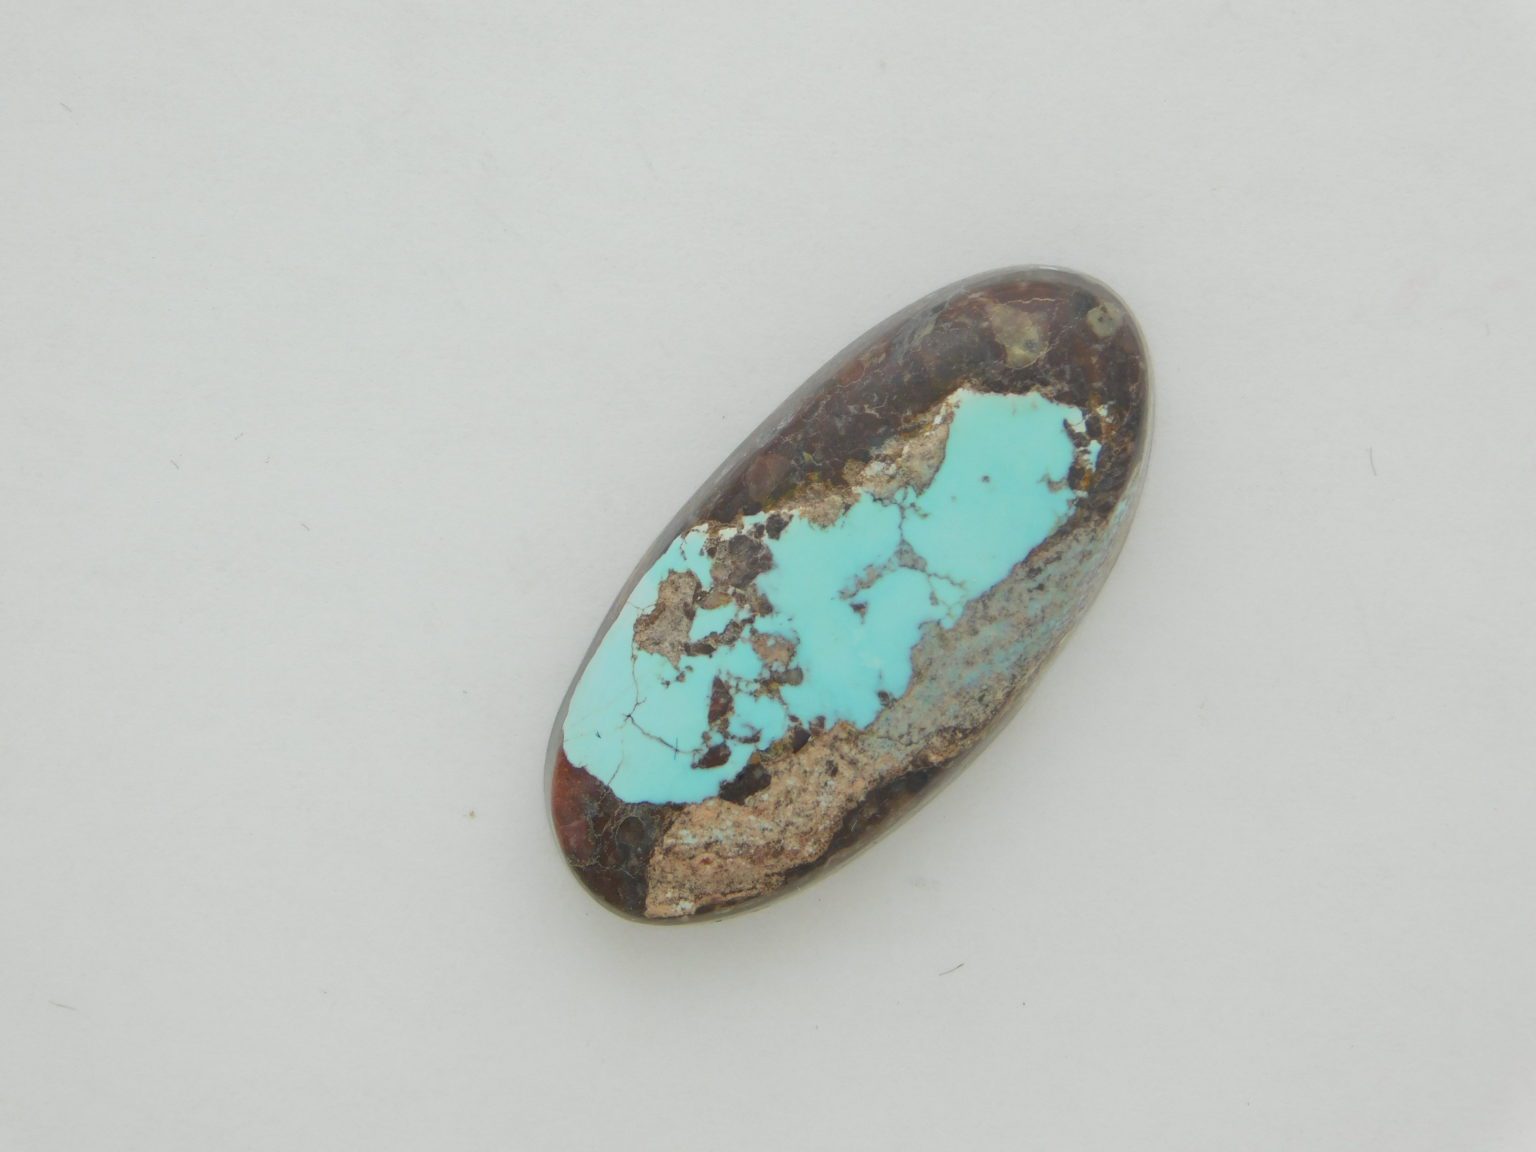 Bisbee Turquoise Cabochon 19 carats